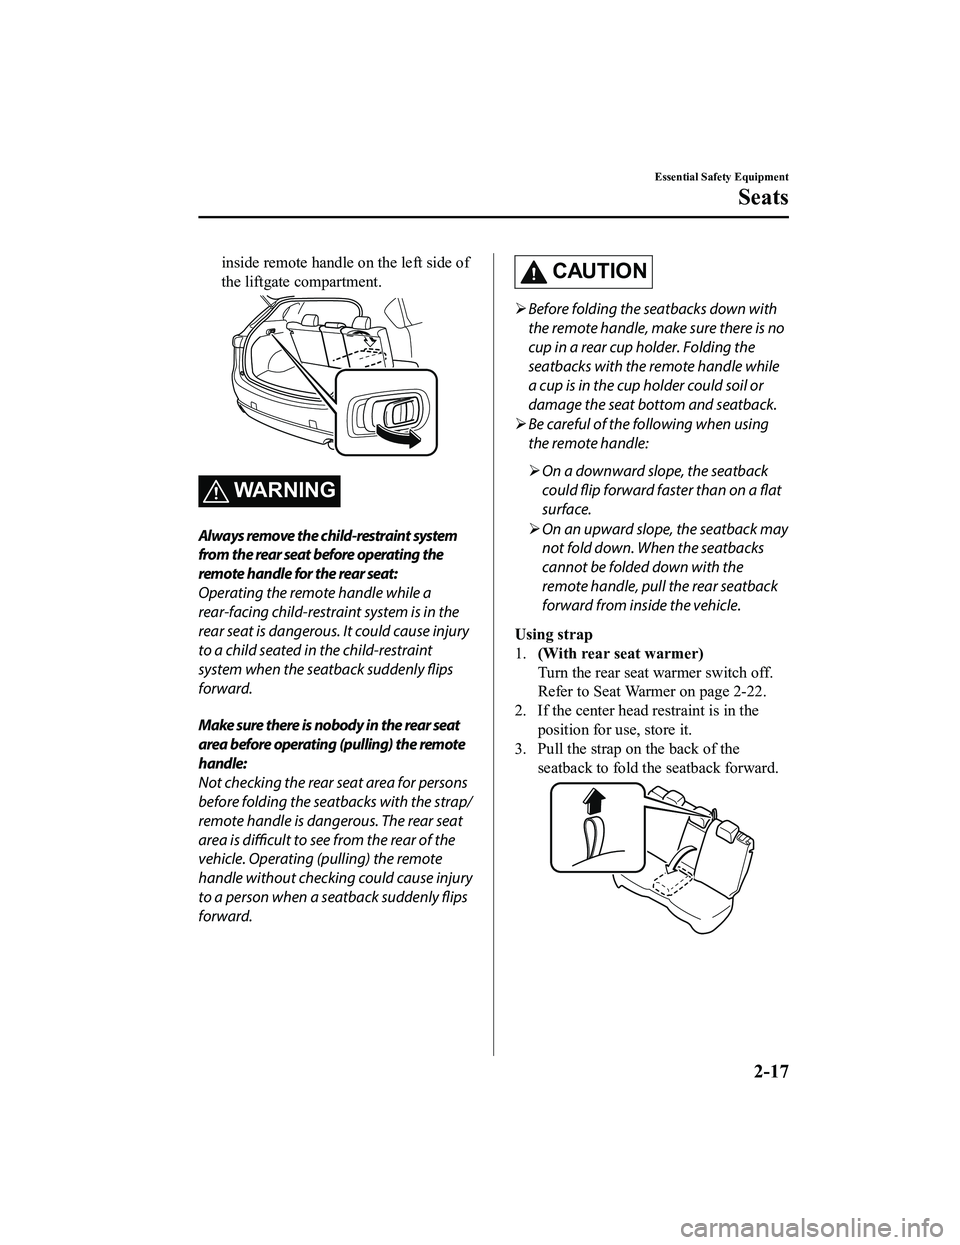 MAZDA MODEL CX-5 2022  Owners Manual inside remote handle on the left side of
the liftgate compartment.
WARNING
Always remove the child-restraint system
from the rear seat before operating the
remote handle for the rear seat:
Operating t